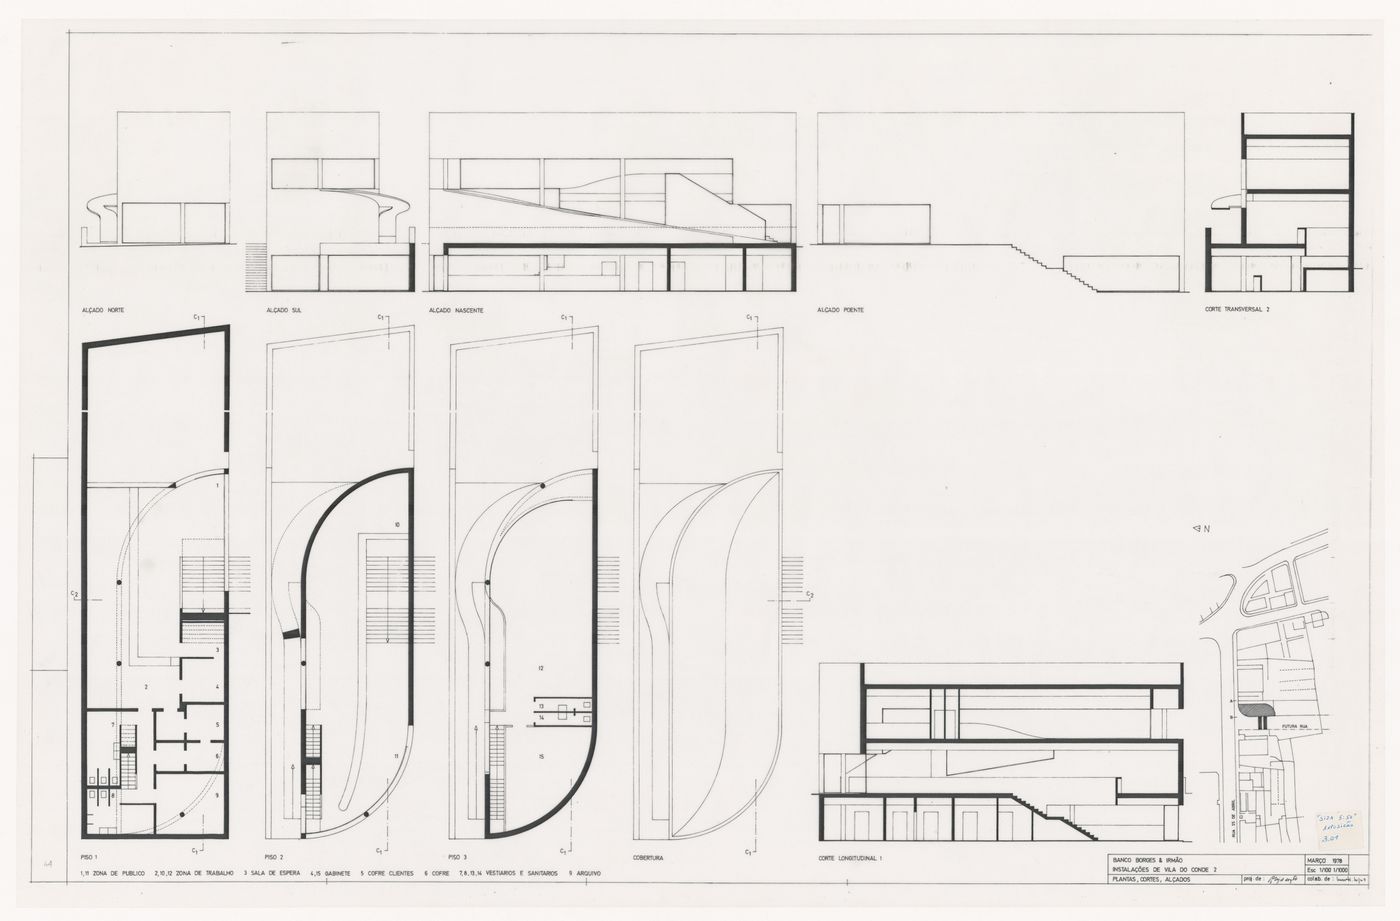 Plans, sections, and elevations for Banco Borges & Irmão II [Borges & Irmão bank II], Vila do Conde, Portugal